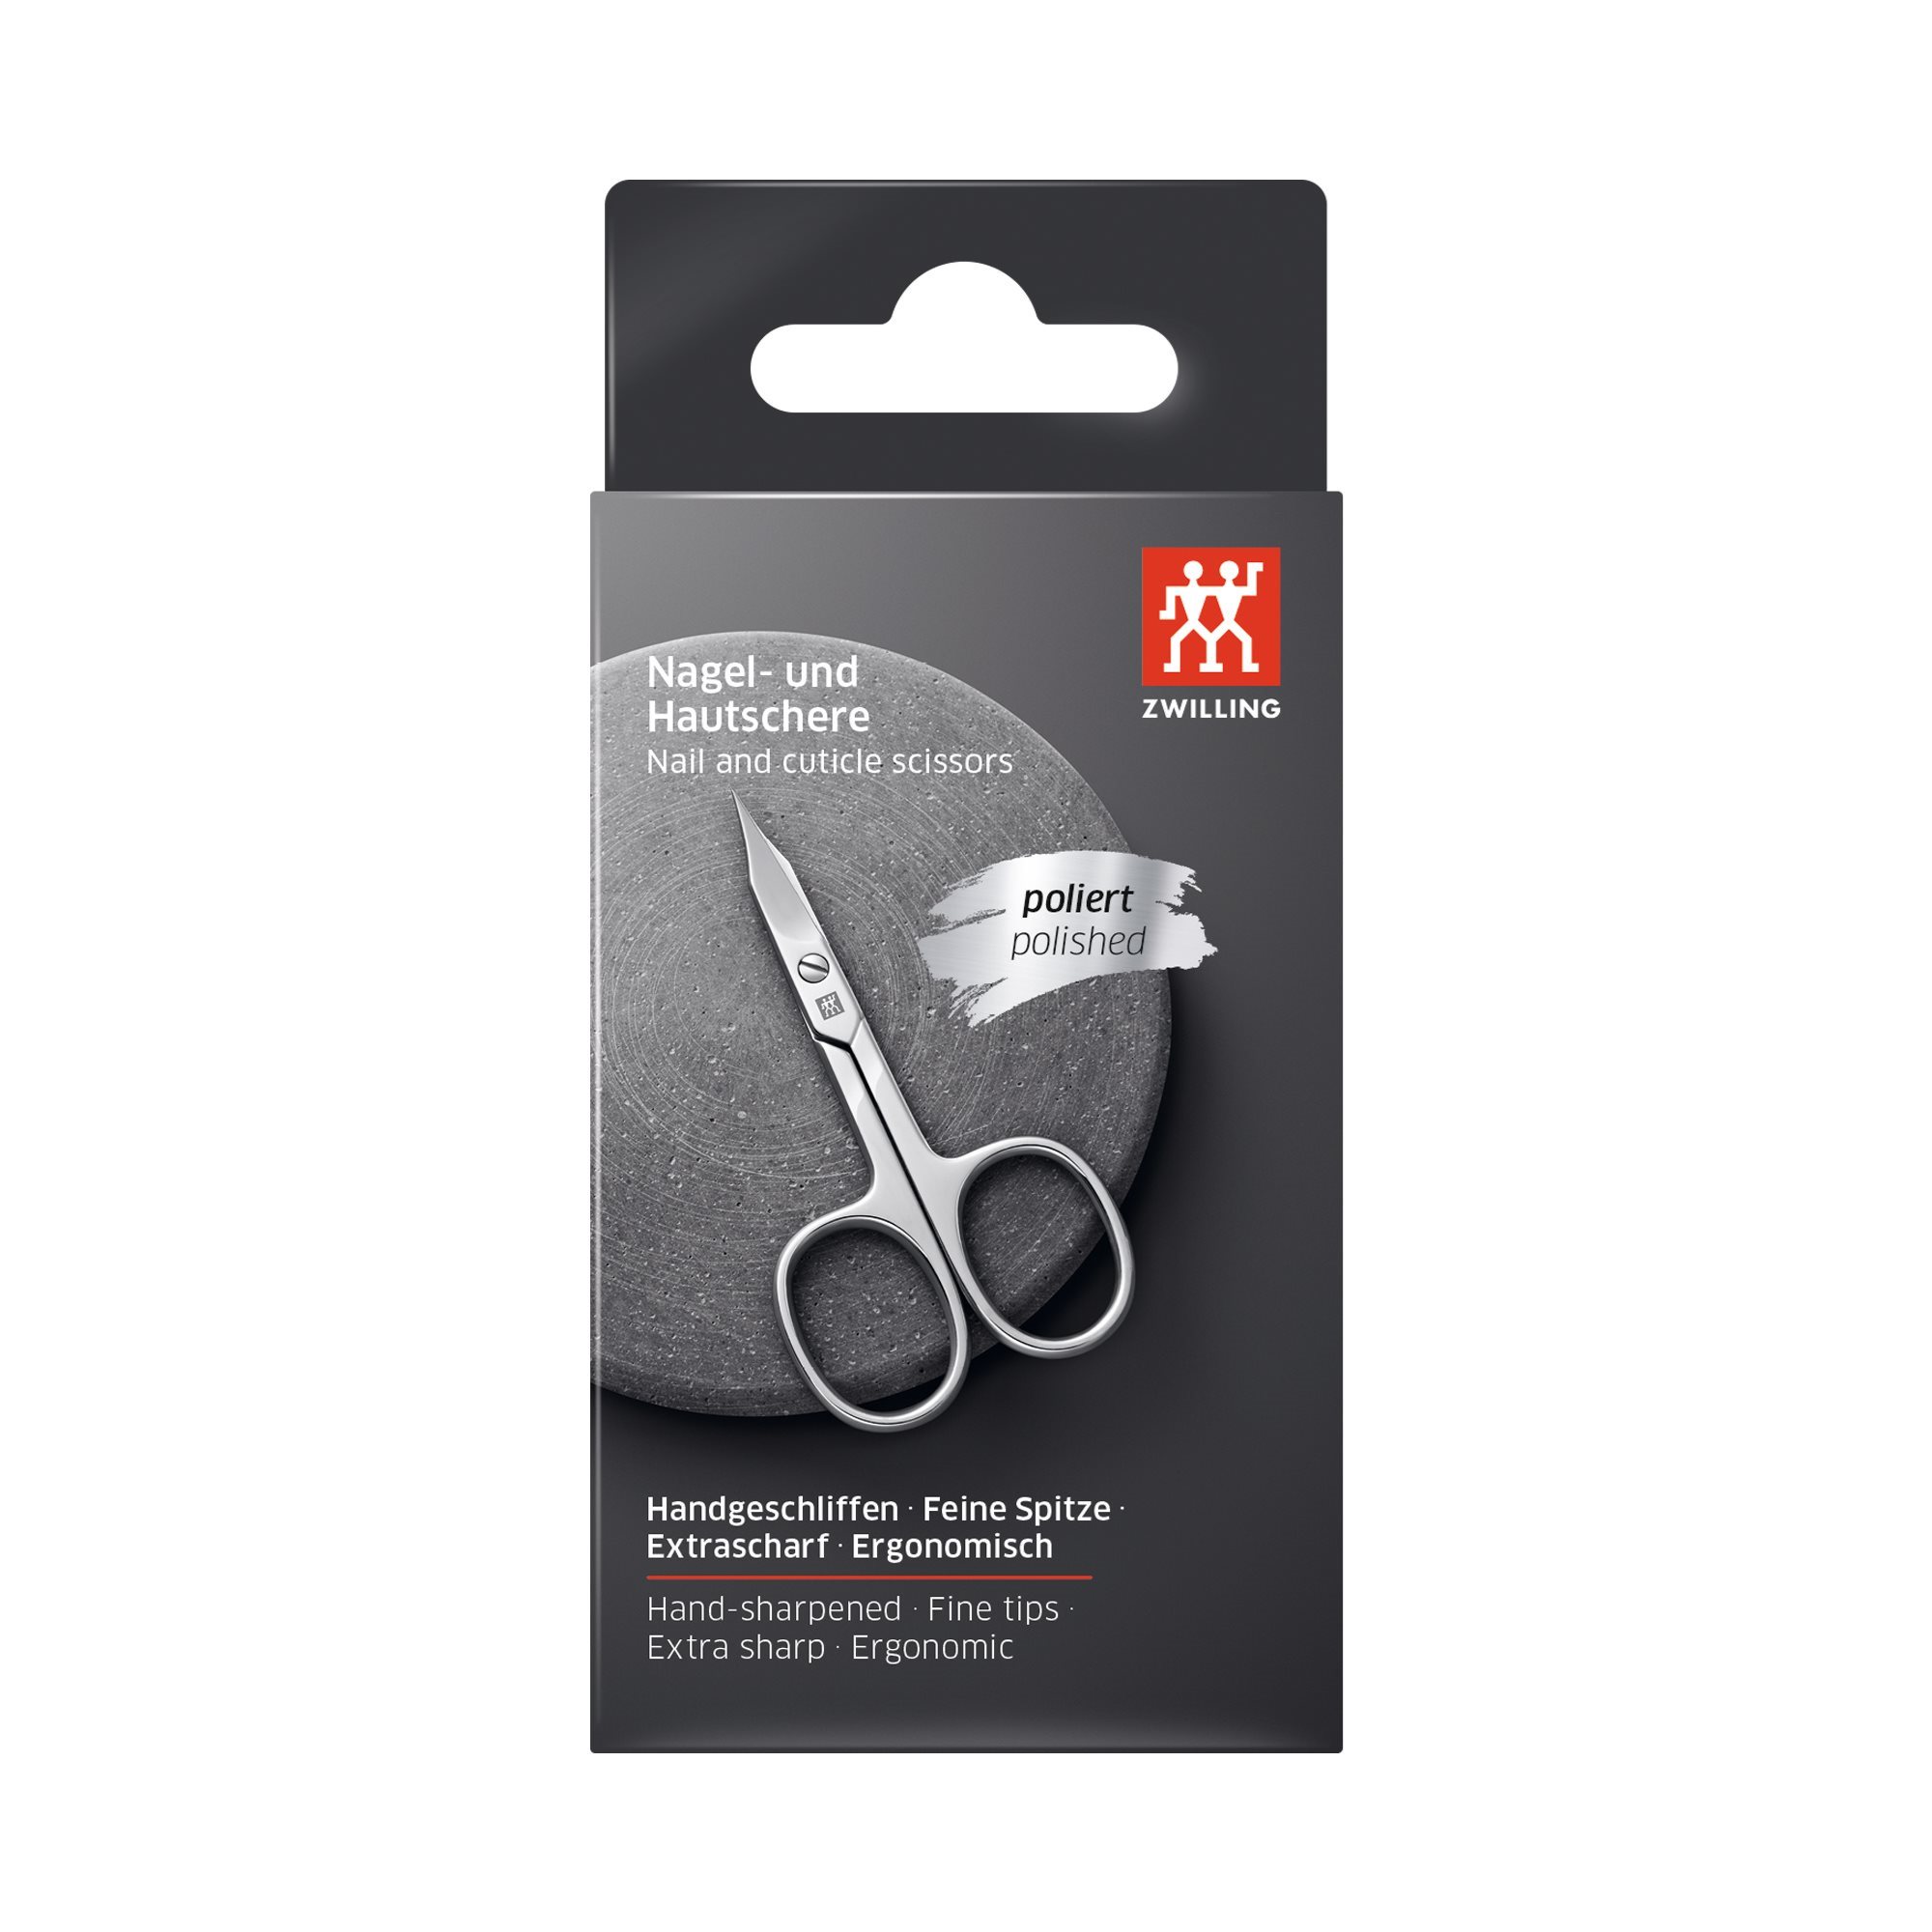 Nail and cuticle - TWIN Zwilling KitchenShop Classic | scissor